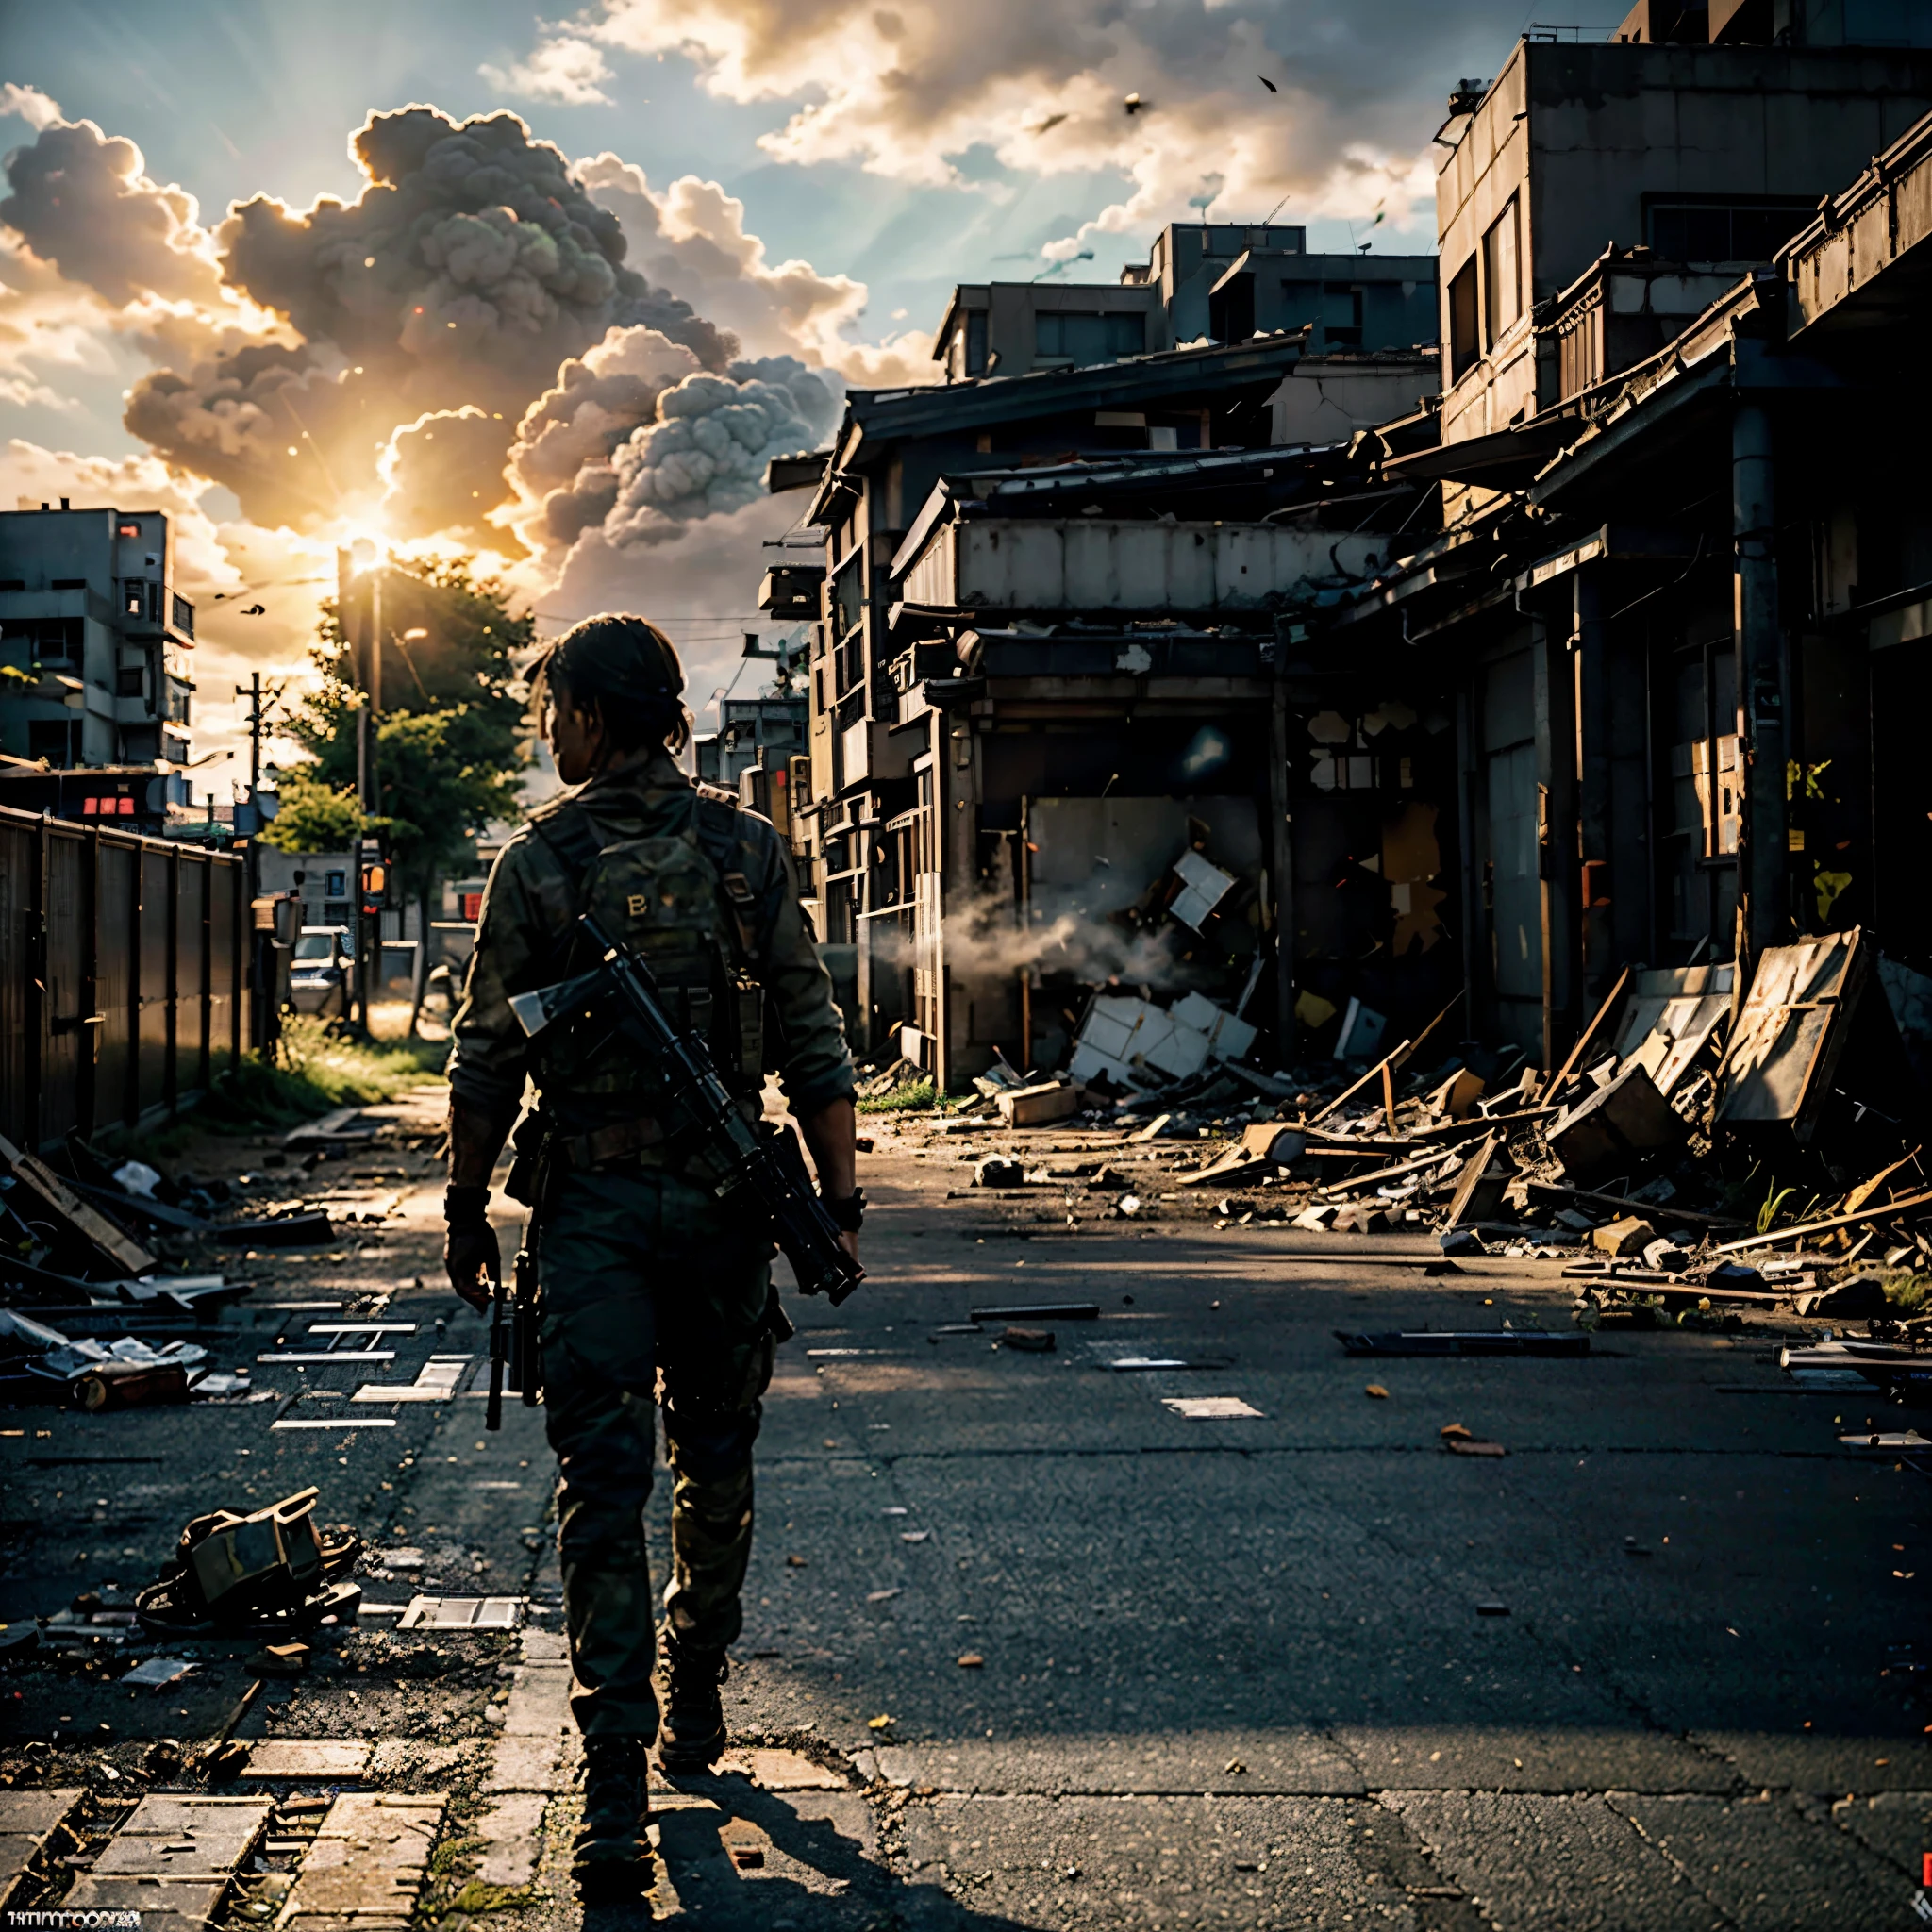 GROUND LEVEL VIEW, ULTRA-HYPER REALIST, A JAPANESE SOLDIER, 30 YEARS OLD, with a machine gun, WALK POSE, SUN RISE, STANDS ON STREET OF THE POST-APOCALYPSE RUINED AND DESTROYED TOKYO CITY, HOSTILE ENVIRONMENT, IMPACTFUL VISUAL DESTRUCTION, STYLE THE LAST OF US, outdoor PHOTO, CINEMATIC LIGHTS, GOLDEN HOUR, FANTASY, UNREAL ENGINE 5, ray tracing, award winning photo, MASTERPIECE photograpy, trending on artstation, HDR, UHD, 8K, BY NAUGHTY DOG.